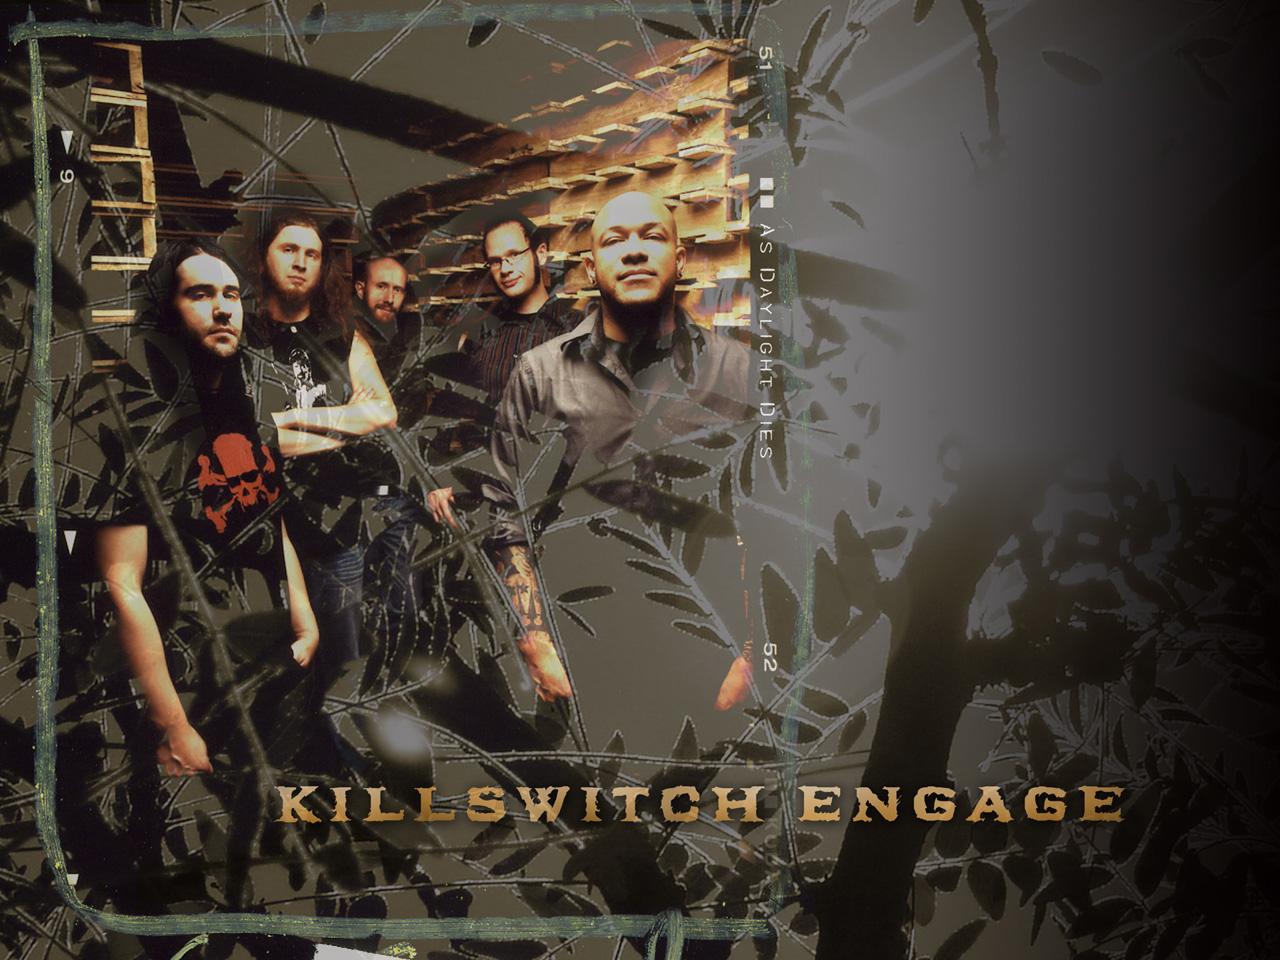 Band Killswitch Engage wallpapers